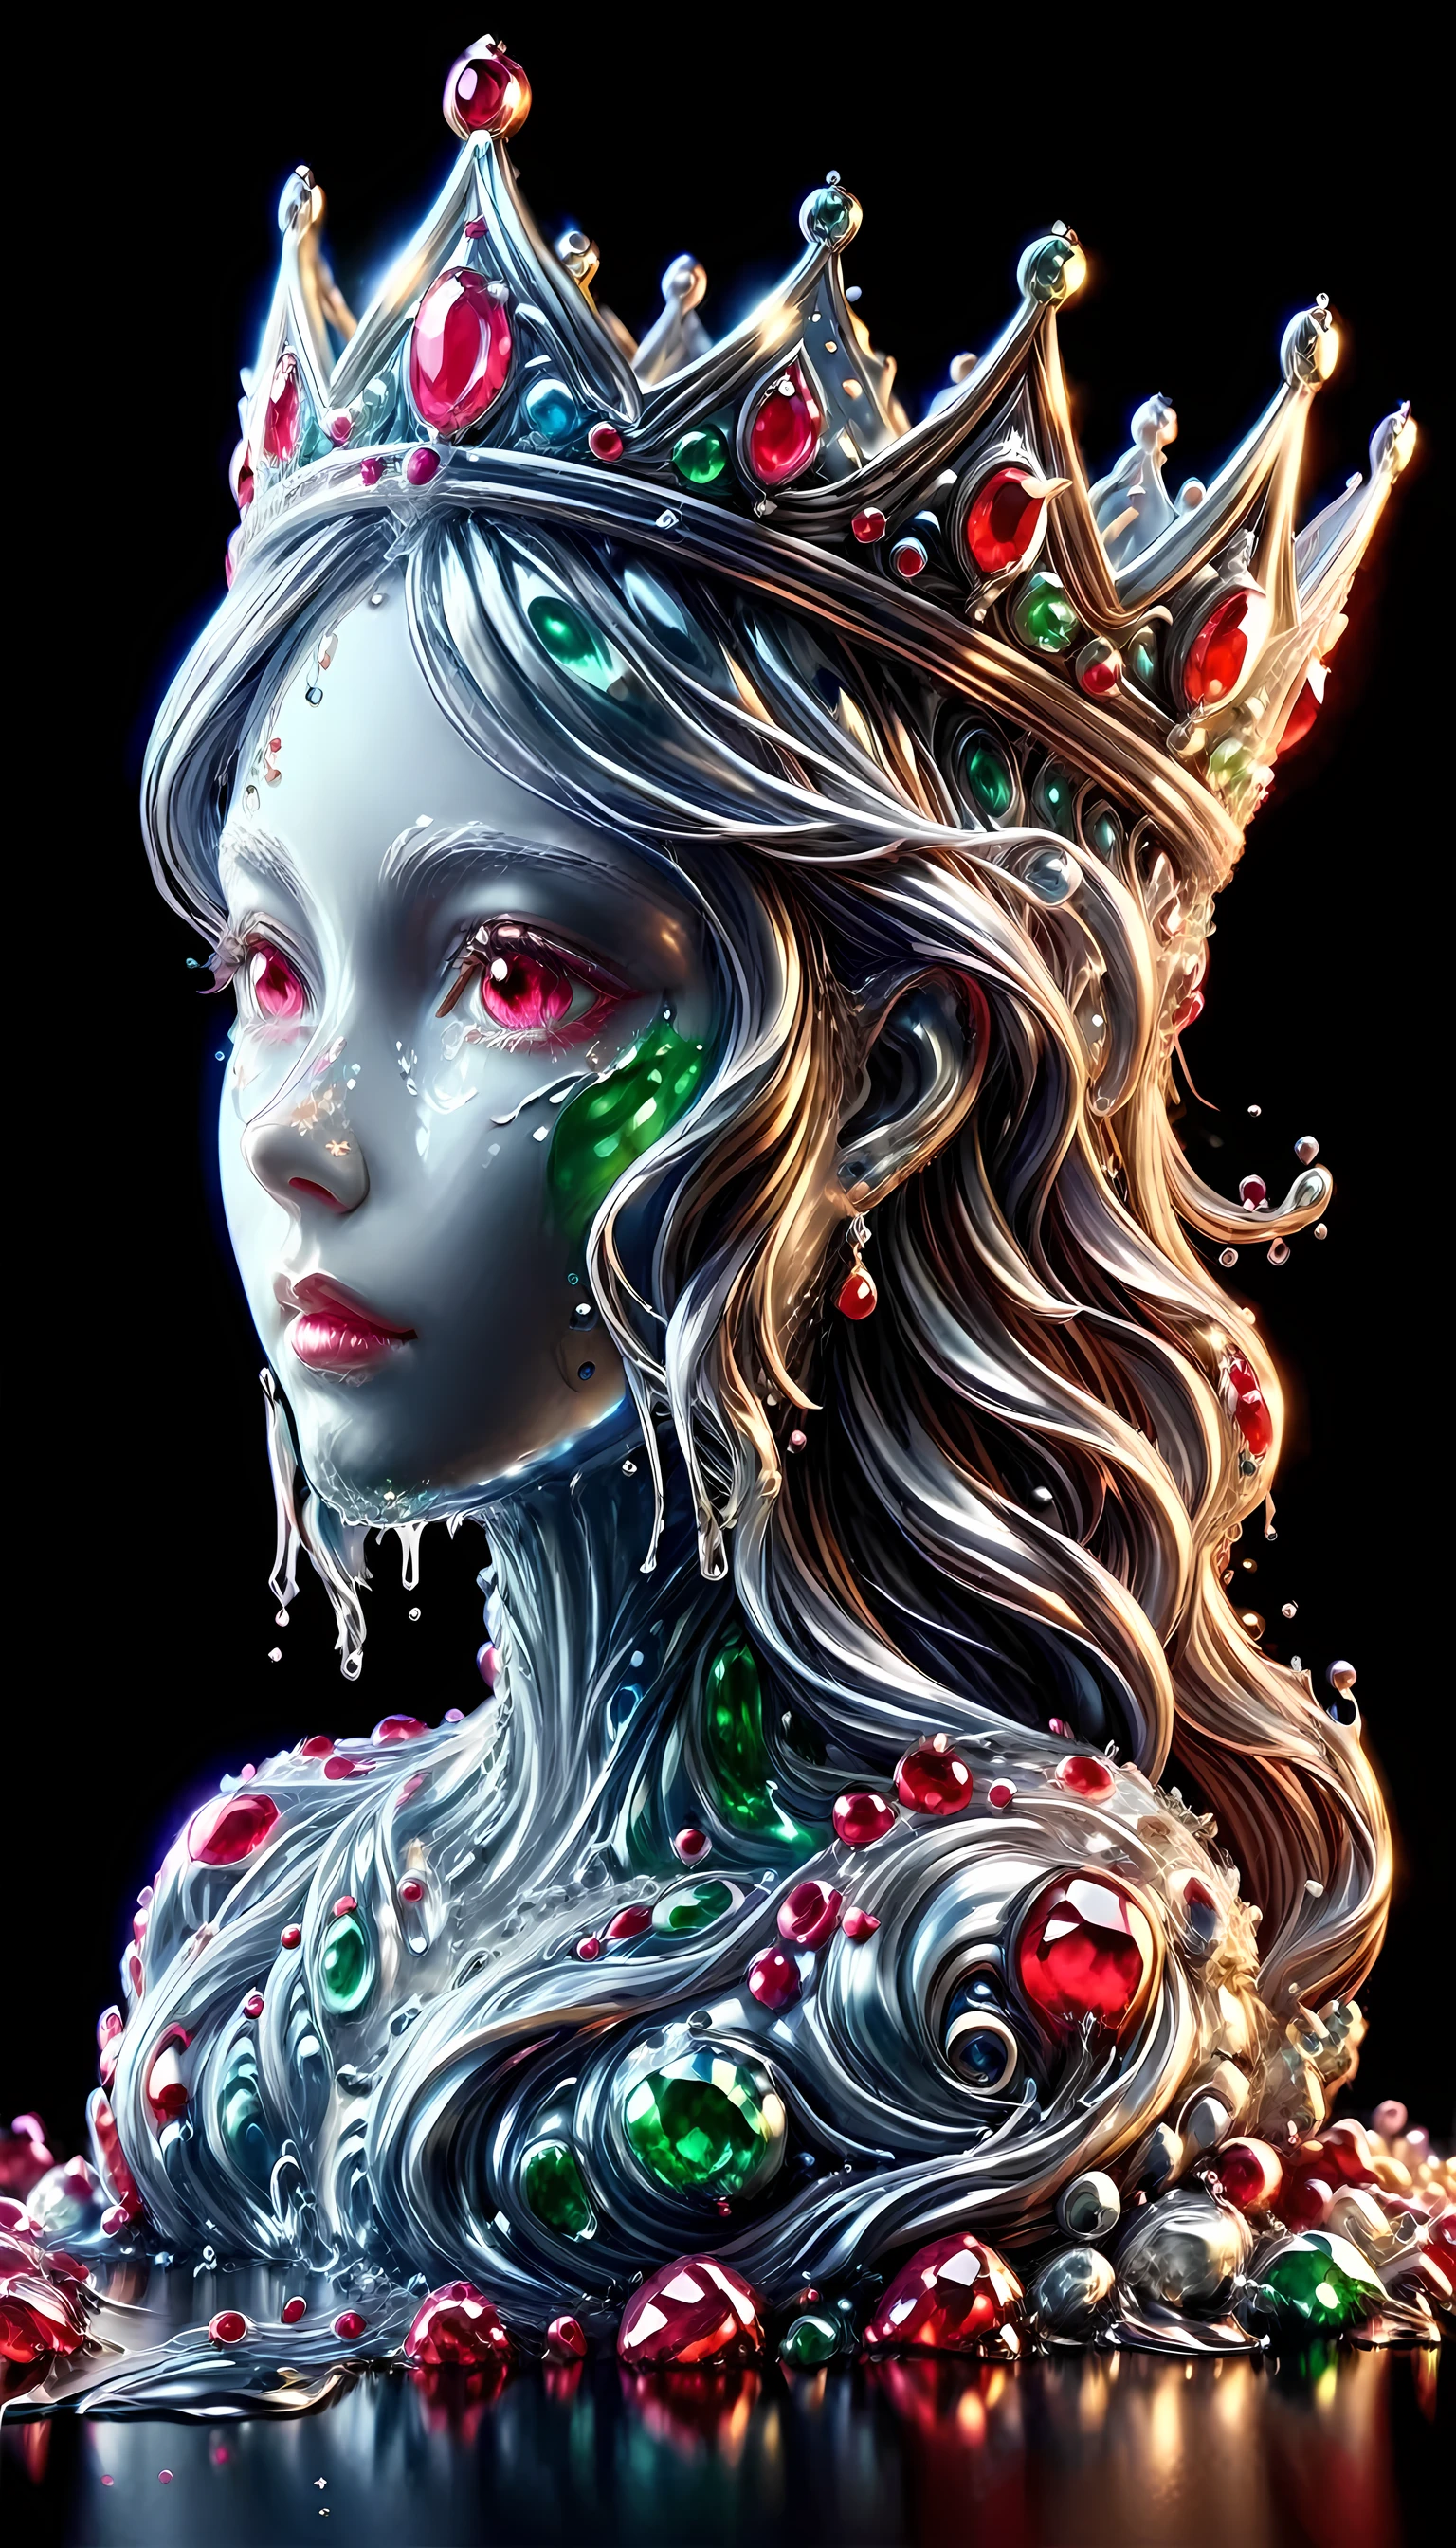 (liquid metal art: 1.5) LIQUID METAL a picture of jeweled crown ( (masterpiece, best detailed, best quality: 1.4), the crown is made from (gold: 1.2), (silver: 1.3), there are golden swirls watce, ( (masterpiece, best detailed, best quality: 1.2), there are silver swirls watce ( (masterpiece, best detailed, best quality: 1.2),  it is encrusted and decorated with (rubies: 1.3), emeralds: 1.3) and (opals: 1.3), dynamic background, close range picture,  ultra wide shot, photorealism, depth of field, hyper realistic, ral-ntrgmstn, watce, metallic, ais-moltenz